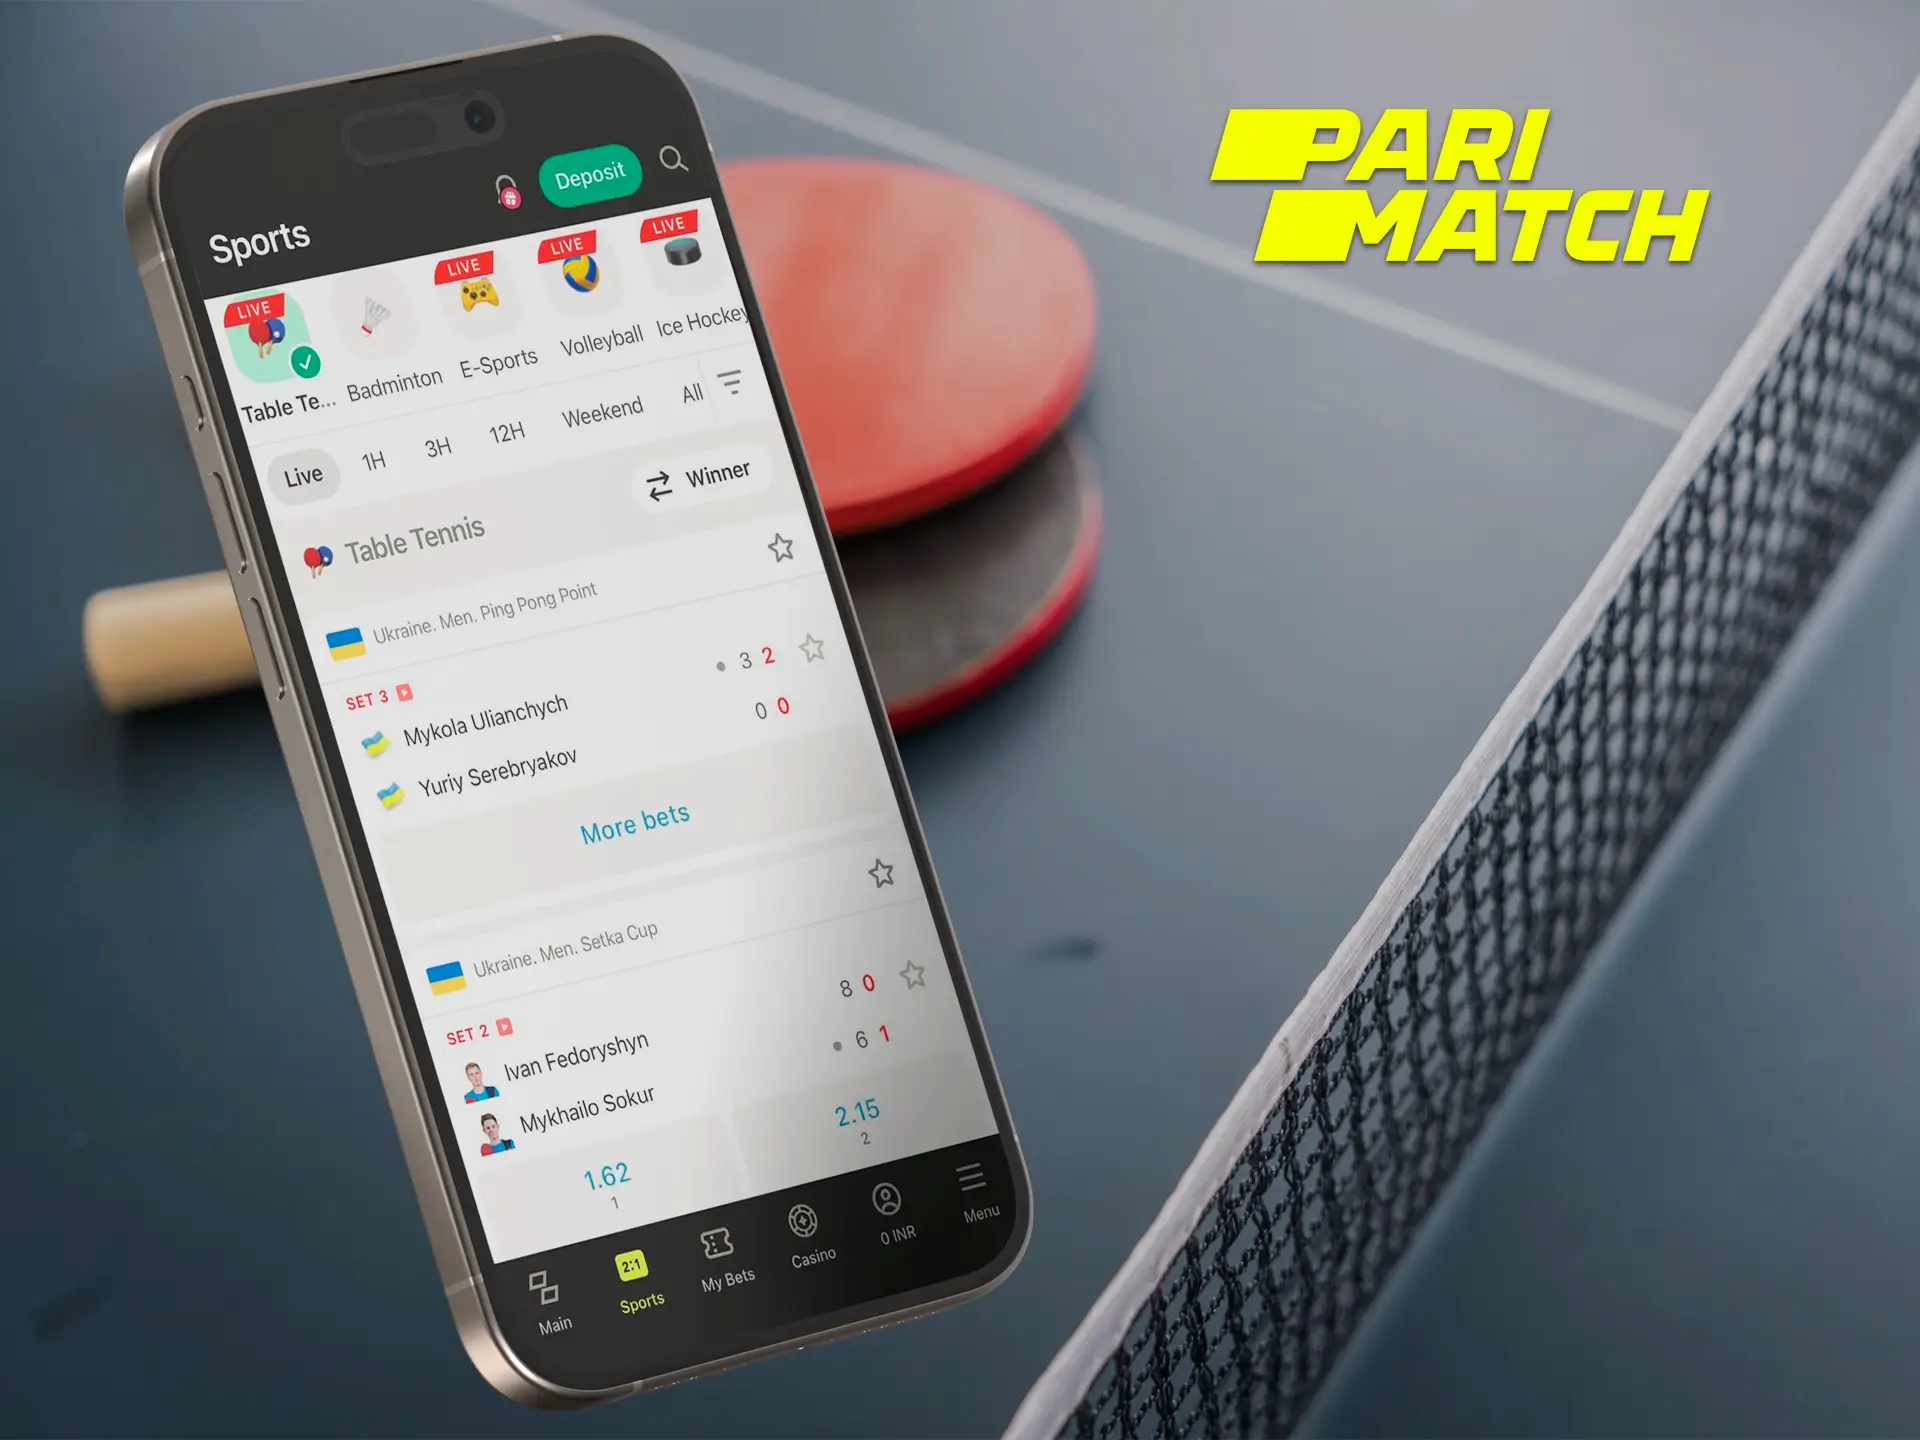 You can always find high odds and attractive betting offers on the Parimatch app.